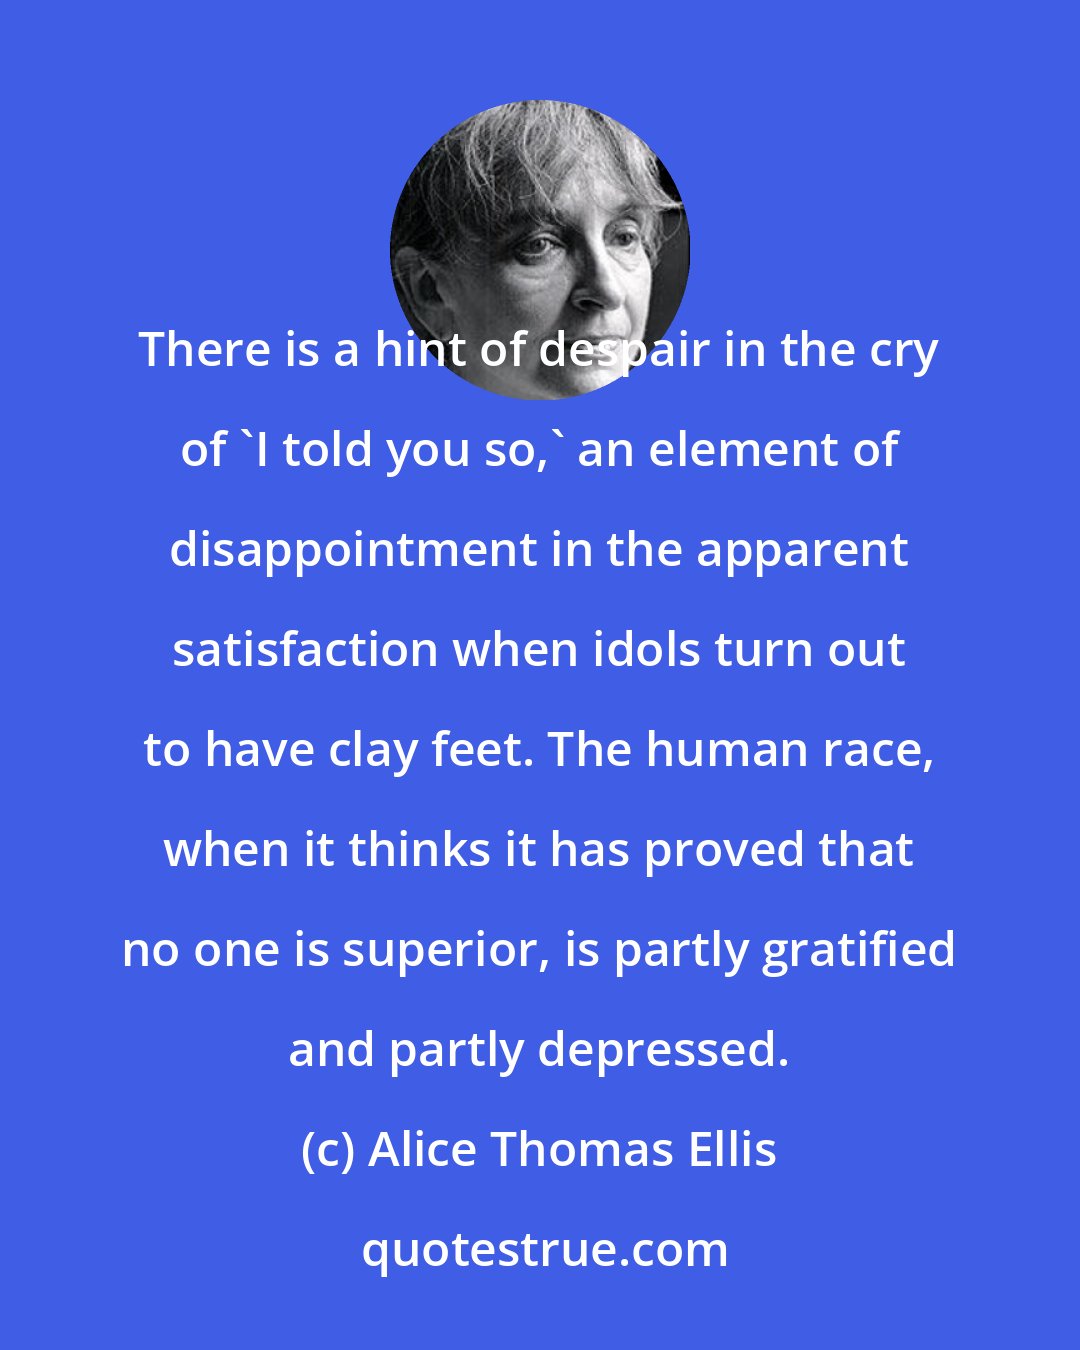 Alice Thomas Ellis: There is a hint of despair in the cry of 'I told you so,' an element of disappointment in the apparent satisfaction when idols turn out to have clay feet. The human race, when it thinks it has proved that no one is superior, is partly gratified and partly depressed.